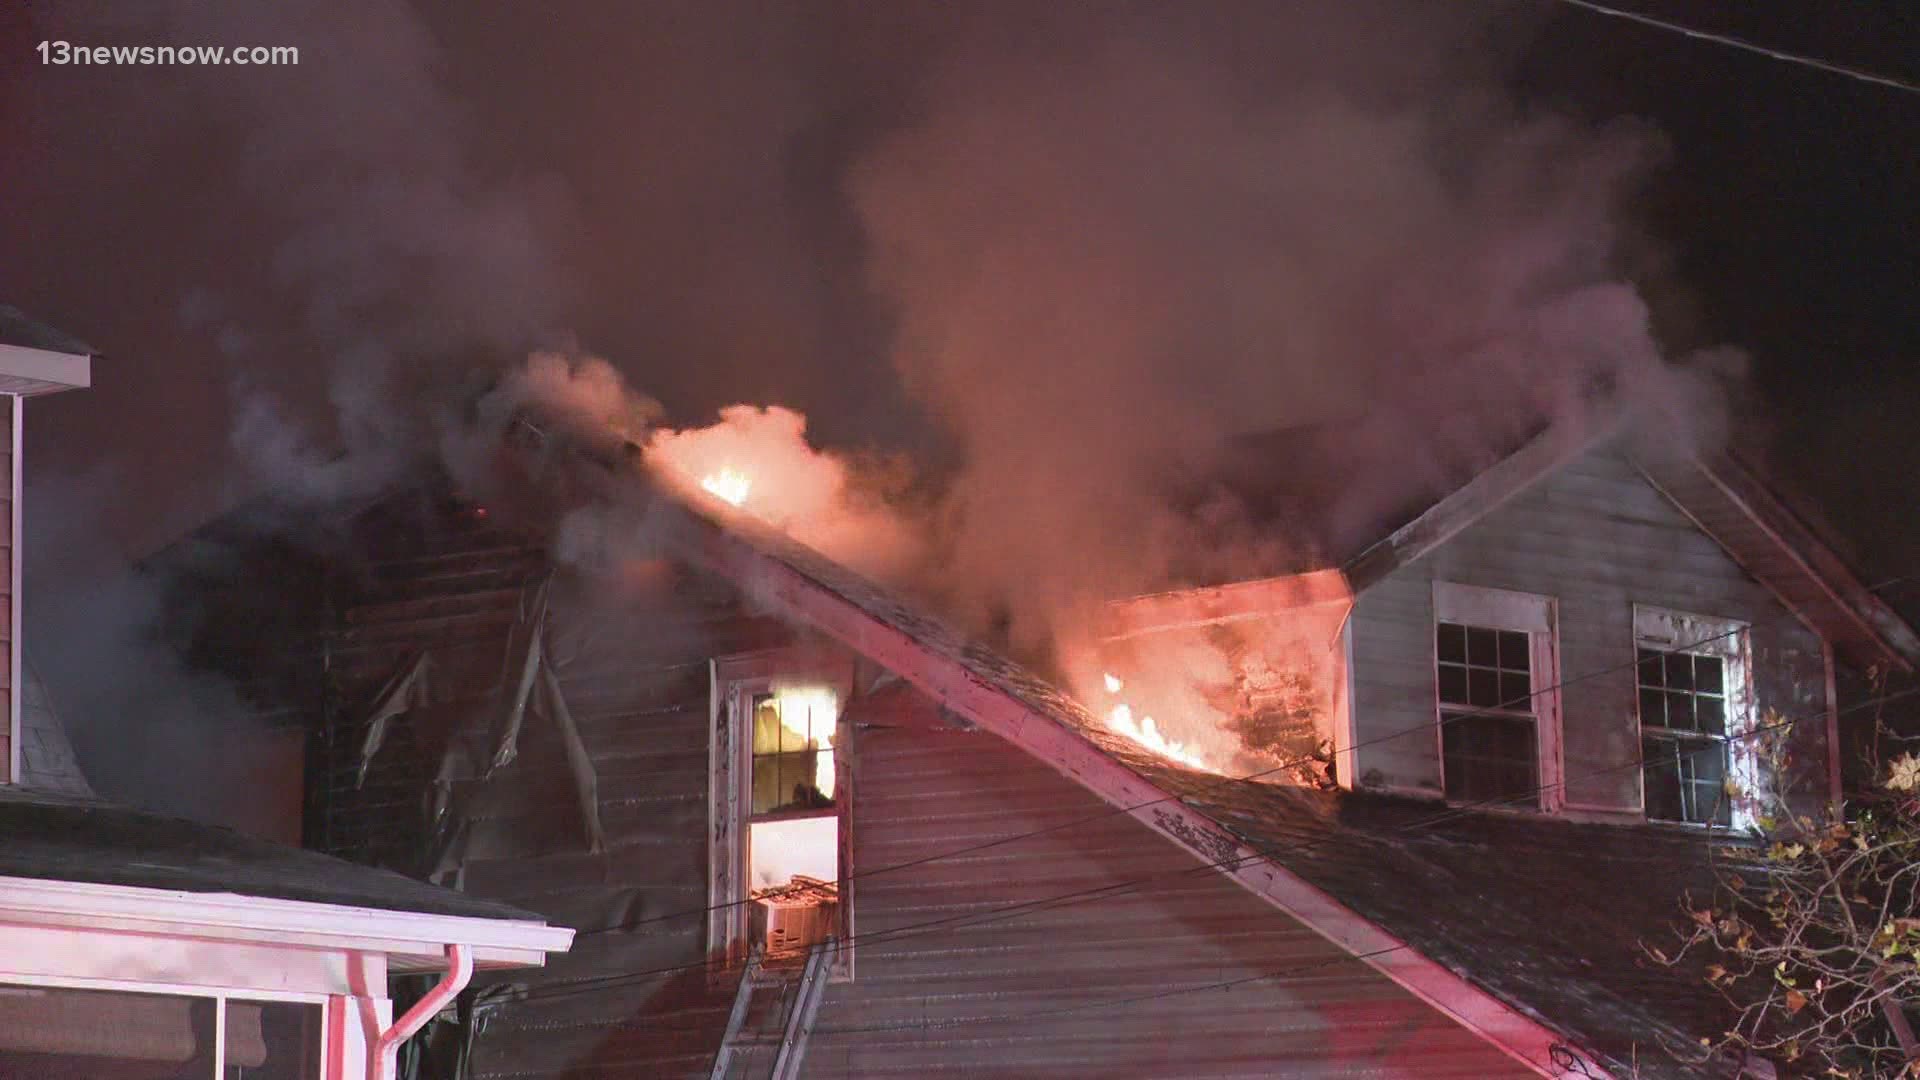 A resident was rescued from one of the fires crews responded to overnight in Newport News.